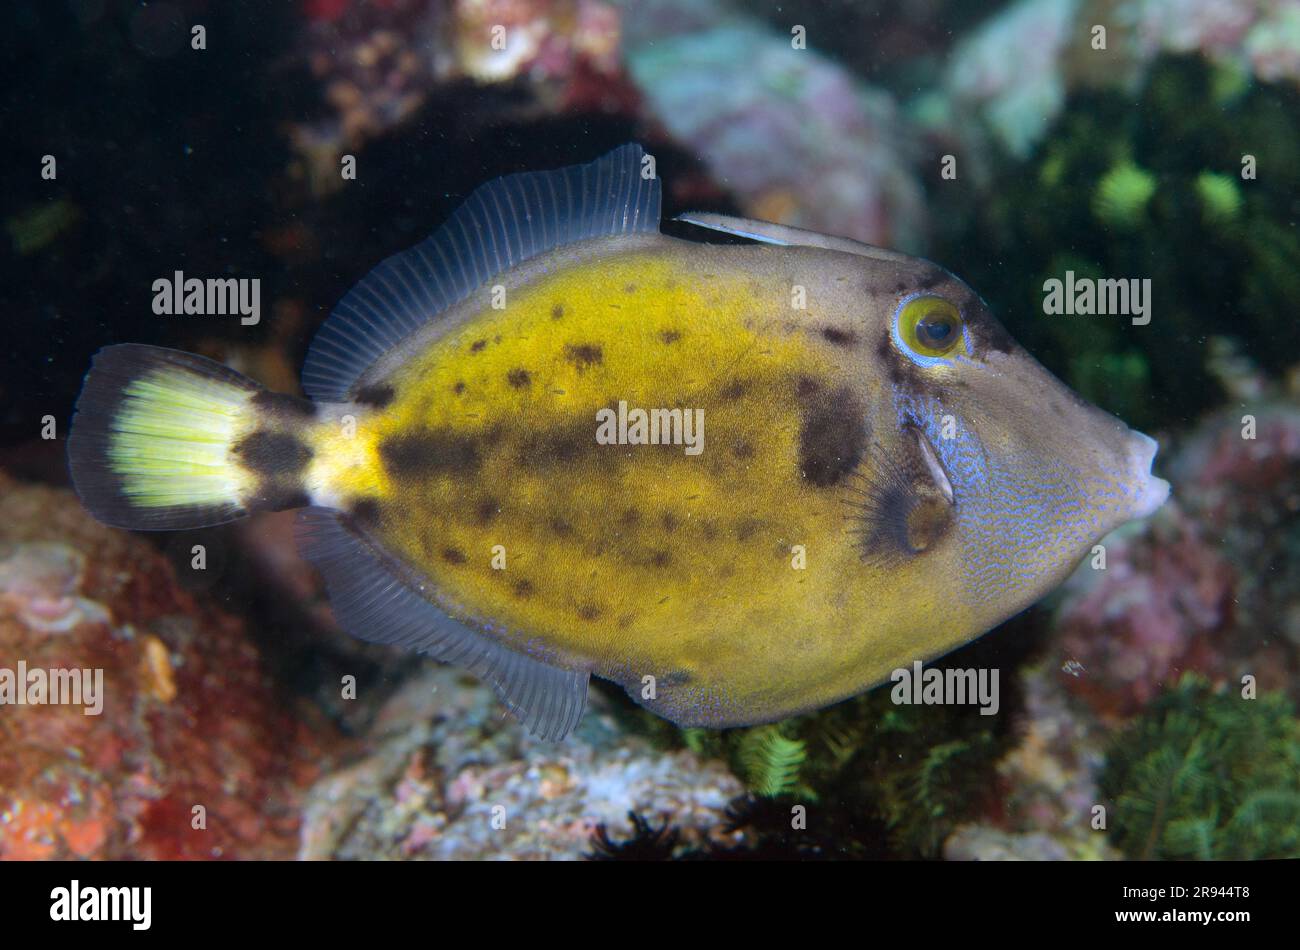 Spectacled Filefish, Cantherhines frontincinctus, with dorsal fin spine, Turtleneck dive site, Candidasa, Bali, Indonesia Stock Photo